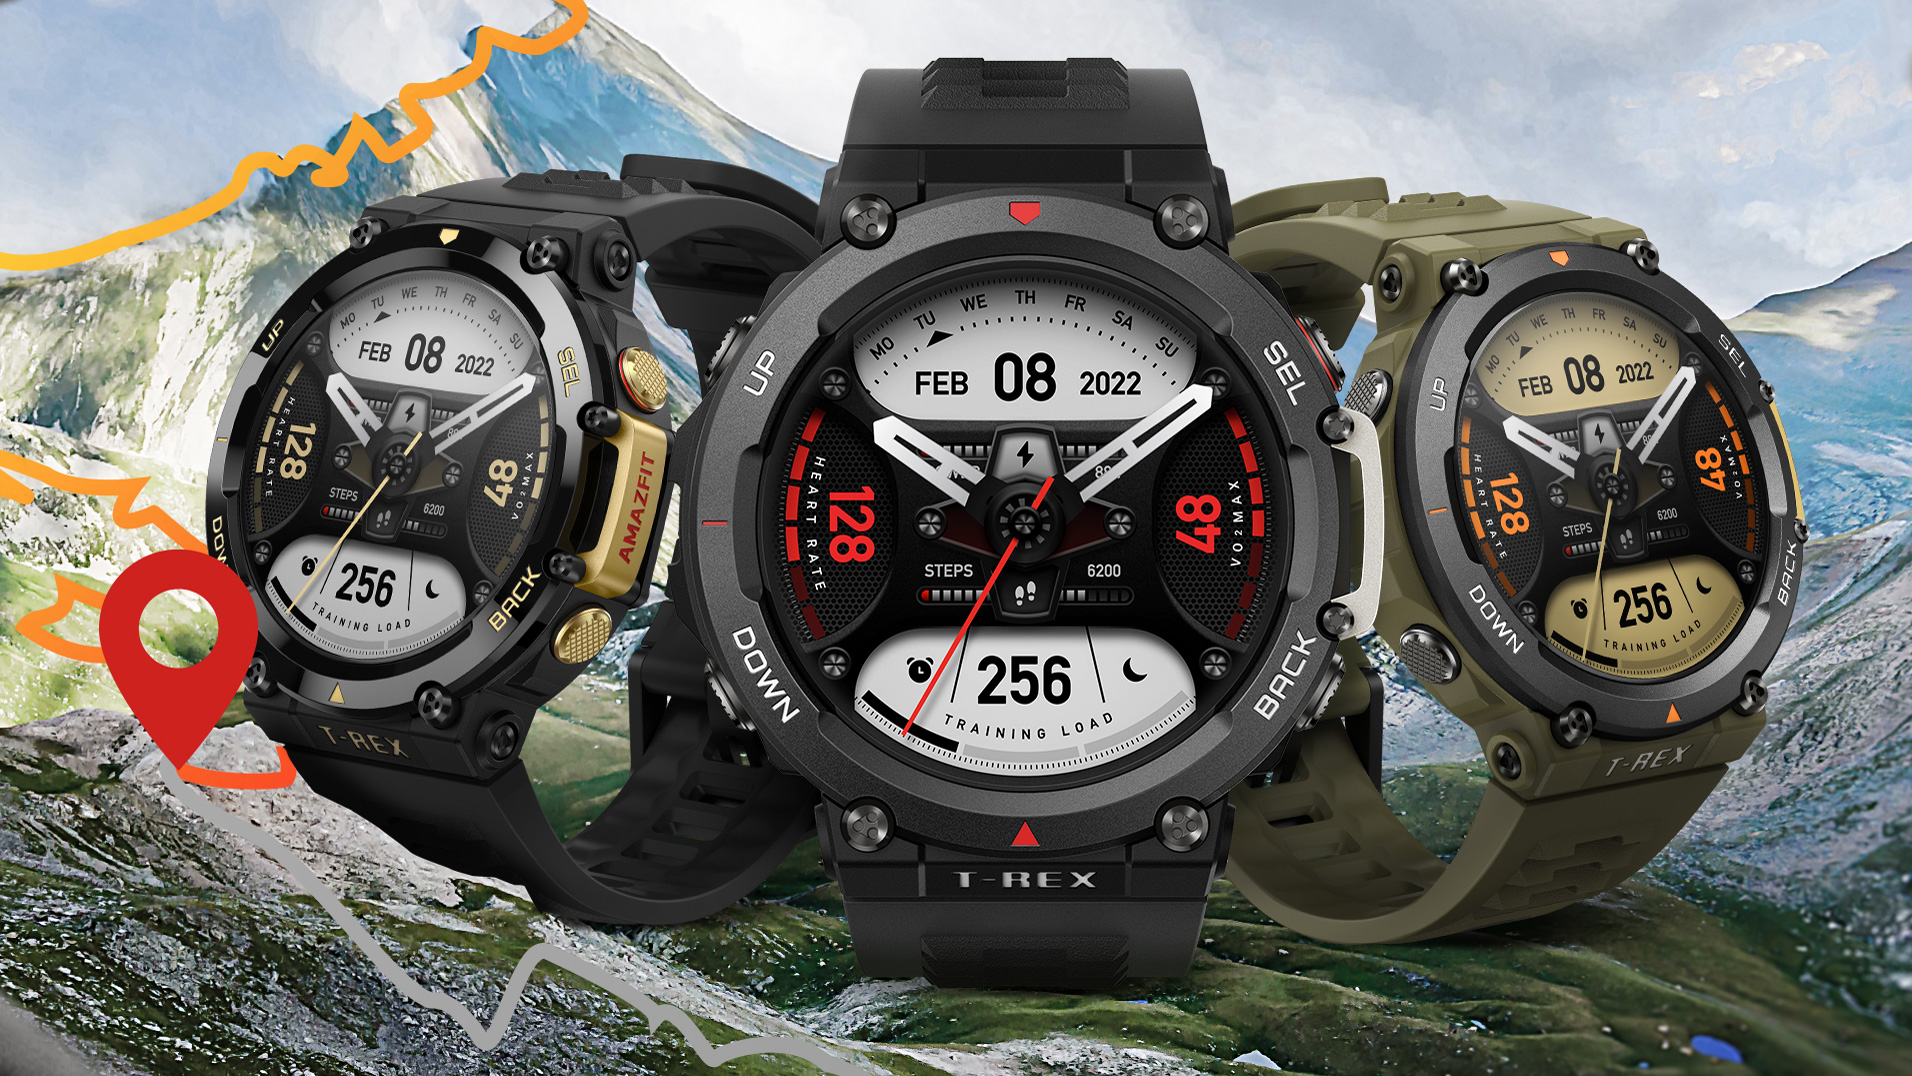 Amazfit TRex 2 review: a rugged adventure watch, at an excellent price